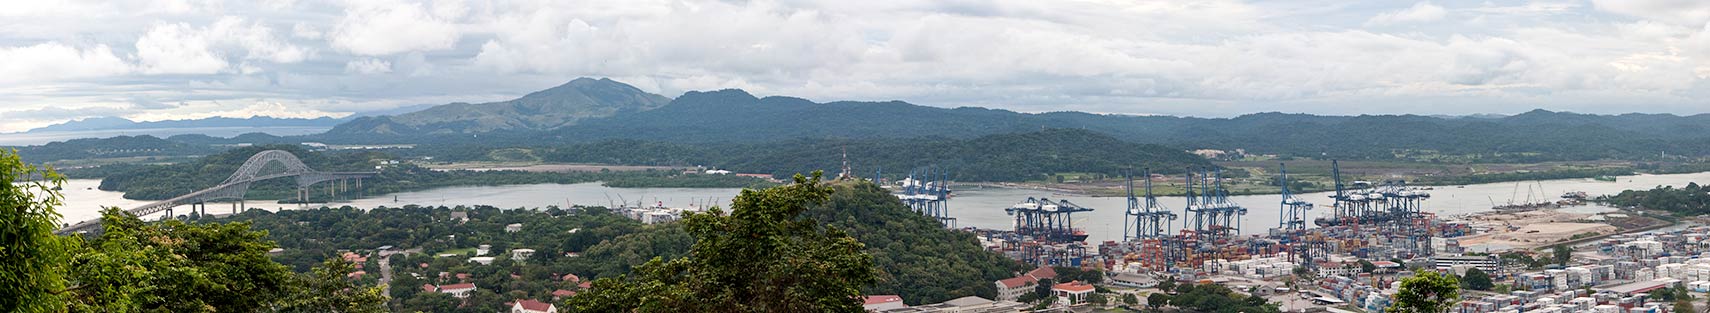 Panorama of Pacific entrance of the Panama Canal